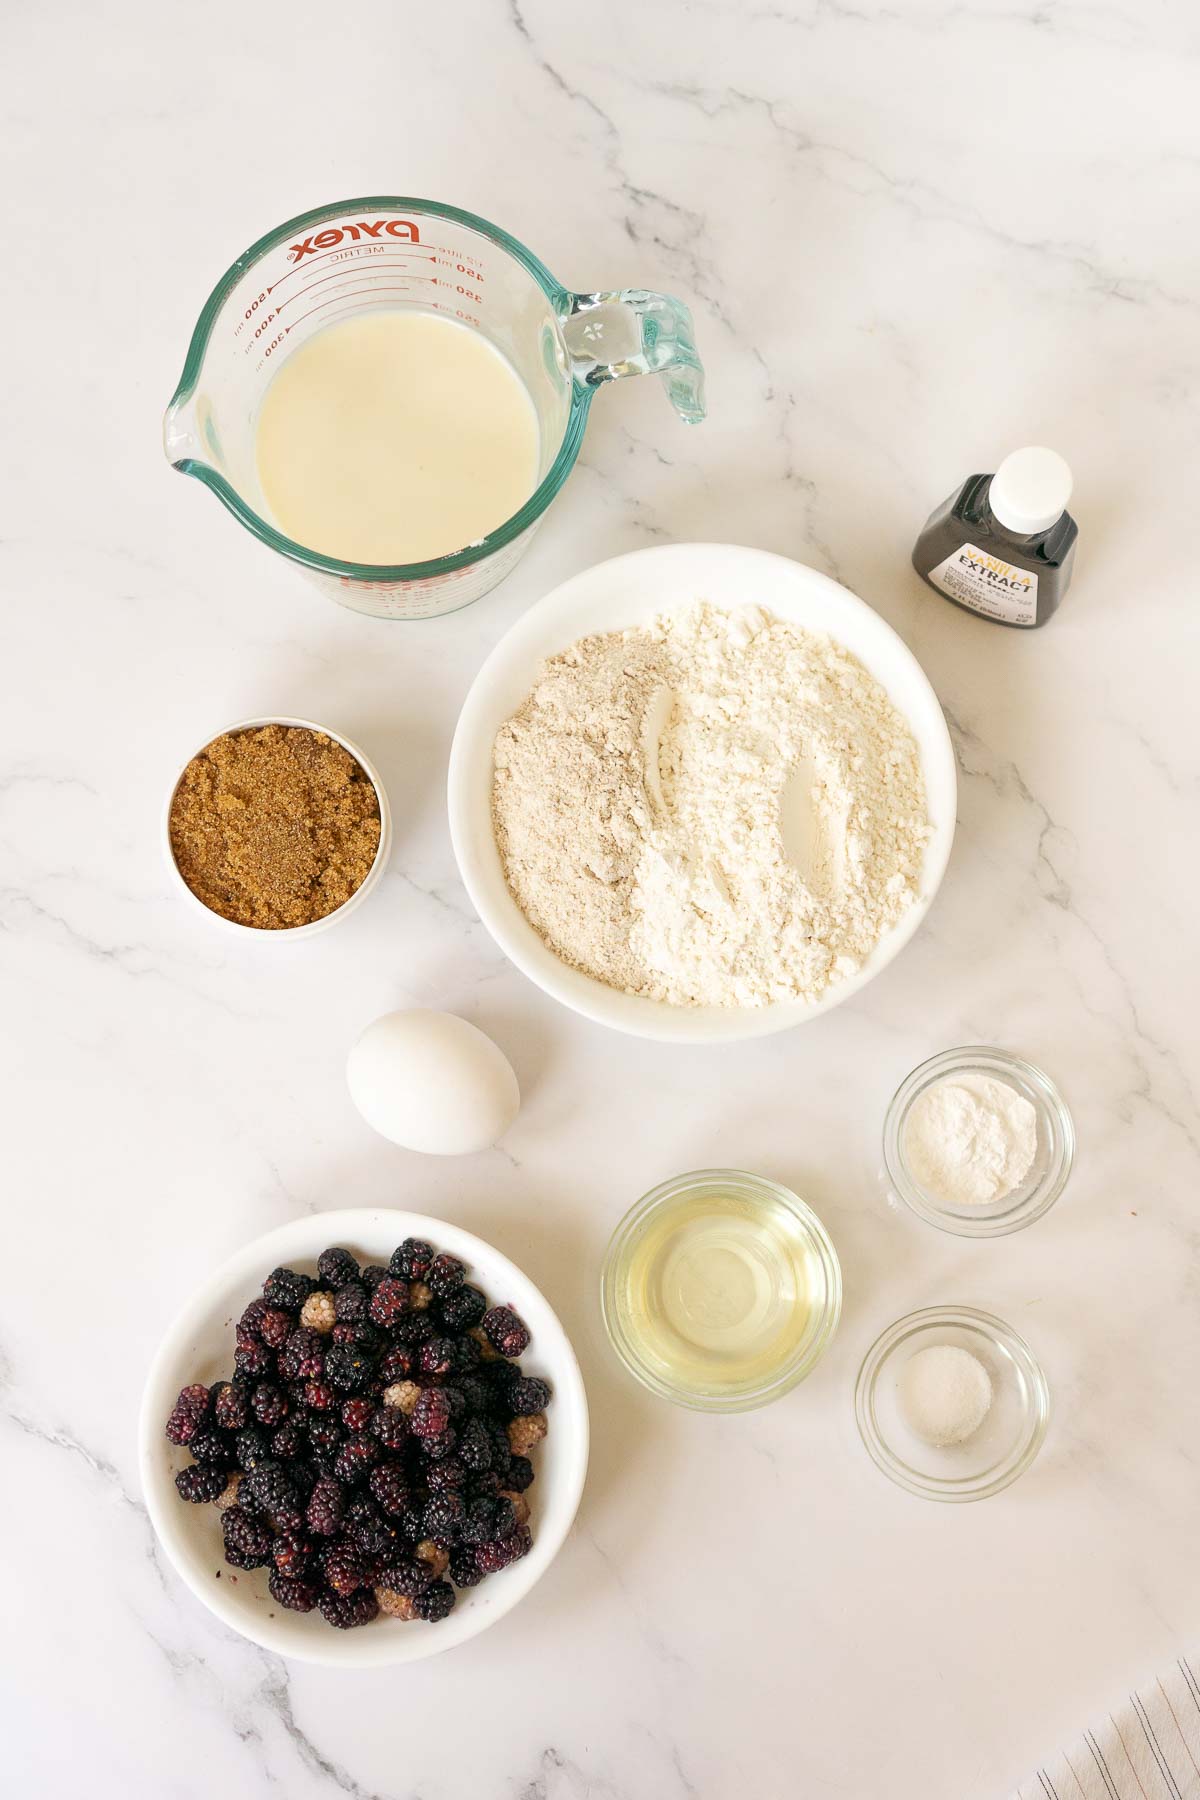 Ingredients to make mulberry muffins